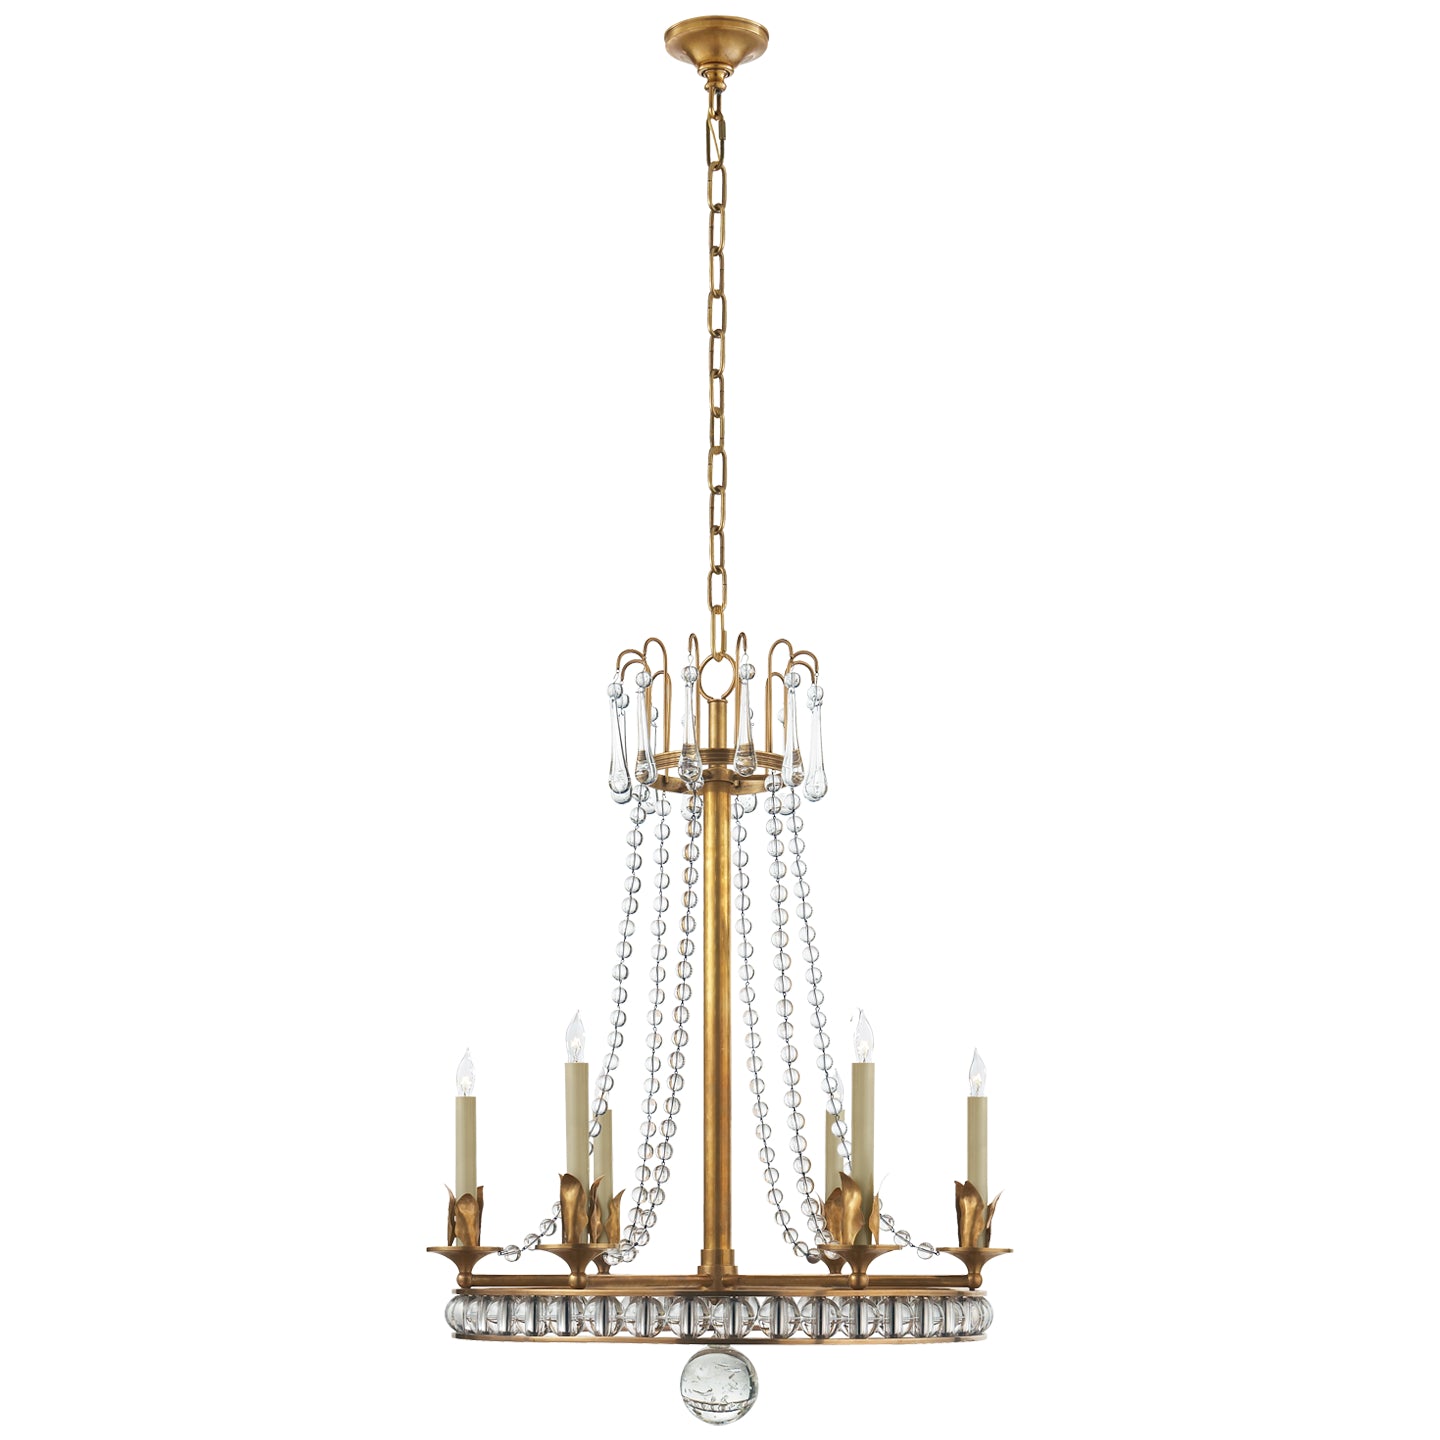 Load image into Gallery viewer, Visual Comfort Signature - SN 5107HAB - Six Light Chandelier - Regency - Hand-Rubbed Antique Brass
